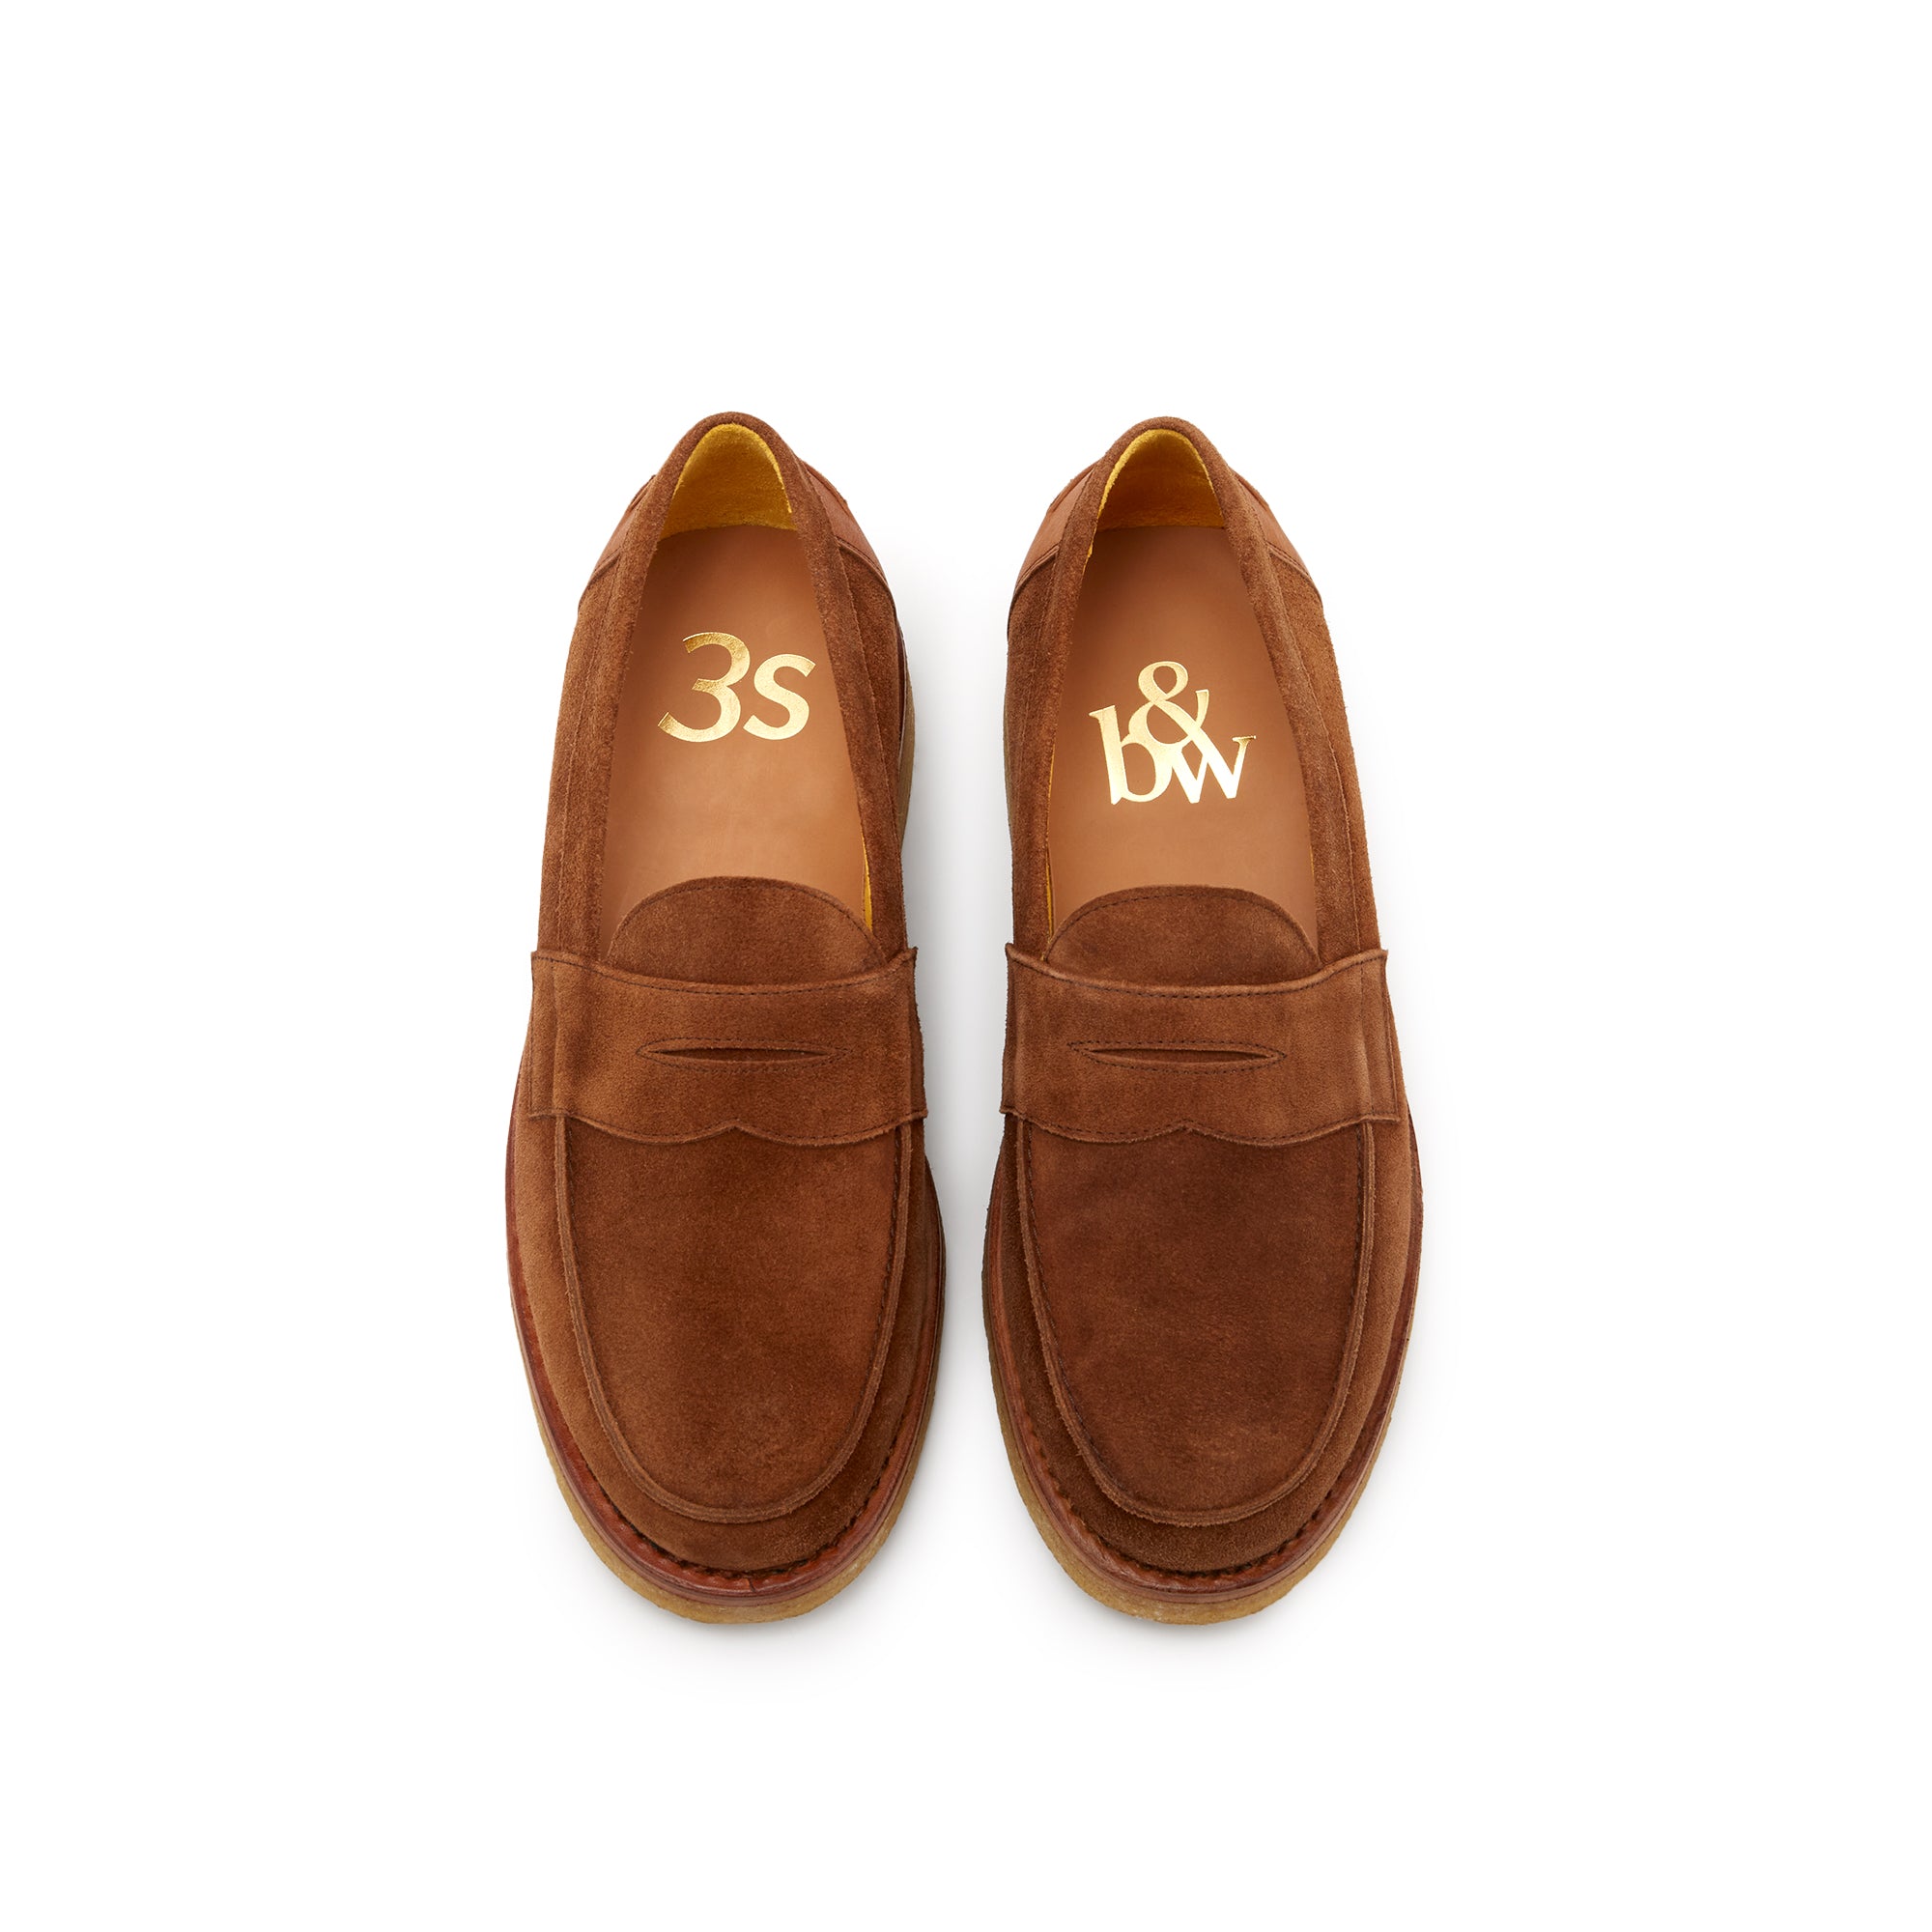 The Crepe Wedge Loafer, Exclusively for 3Sixteen